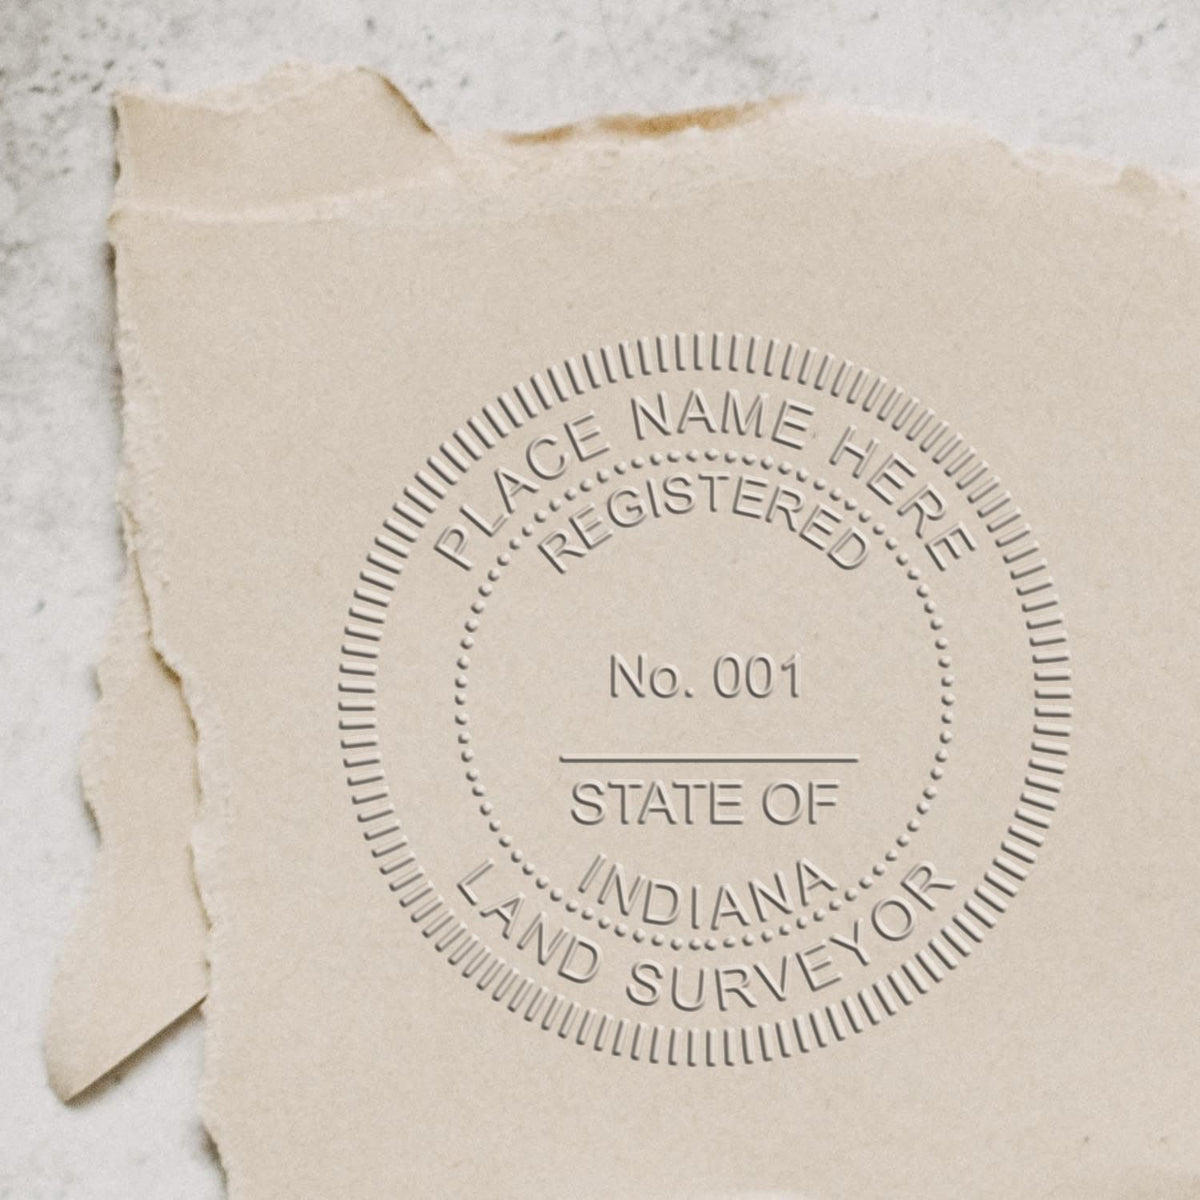 A stamped impression of the Long Reach Indiana Land Surveyor Seal in this stylish lifestyle photo, setting the tone for a unique and personalized product.